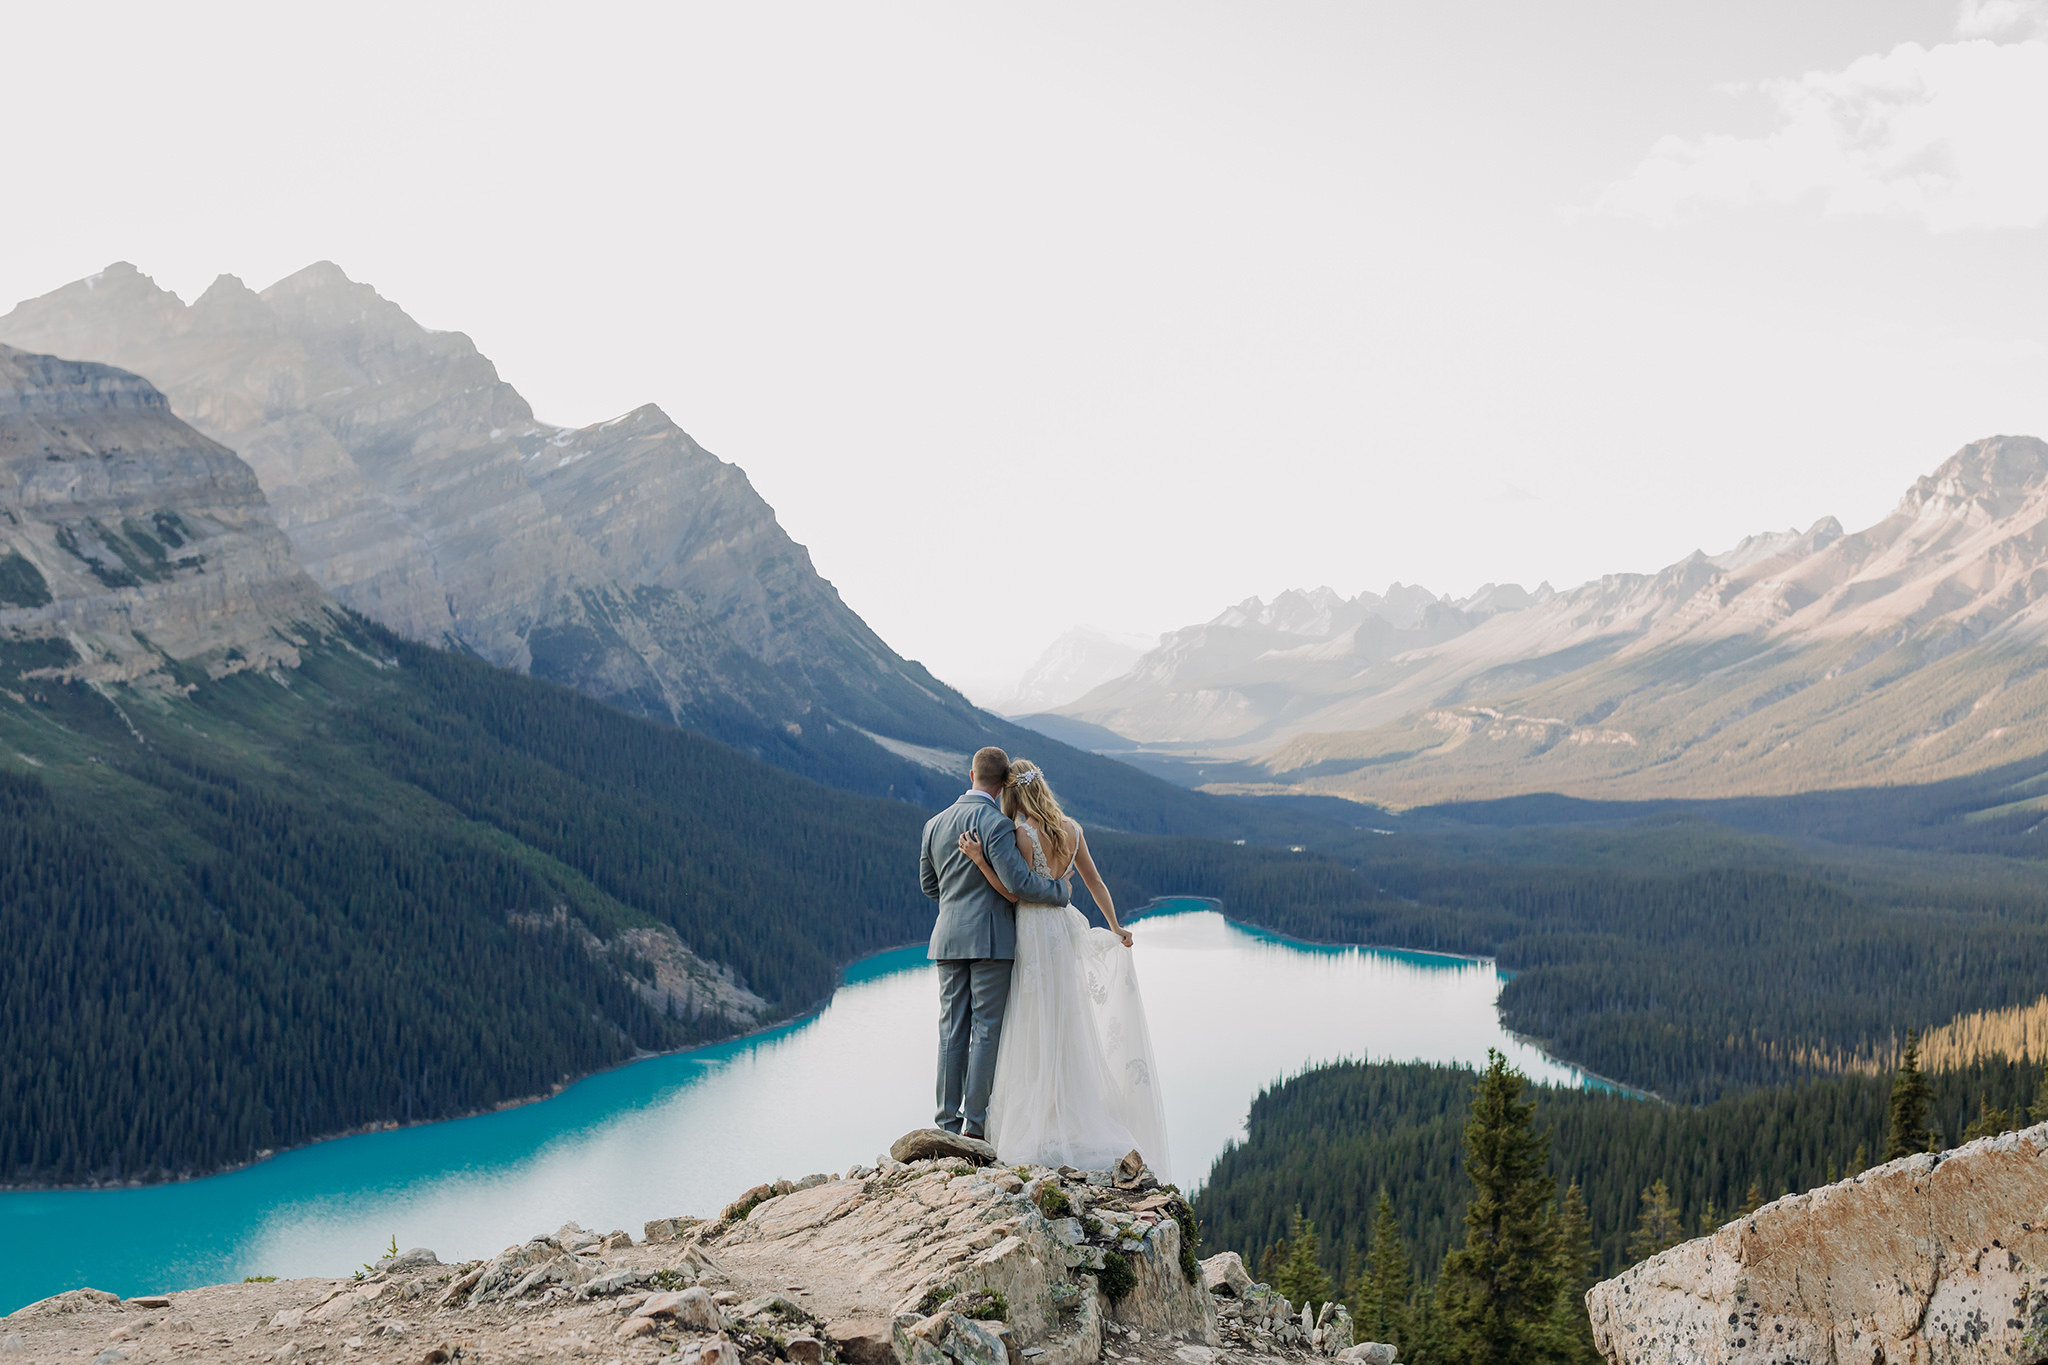 Adventuring in Banff National Park on their wedding day. Summer mountain elopement at Peyto Lake photographed by local wedding & elopement photographer ENV Photography 